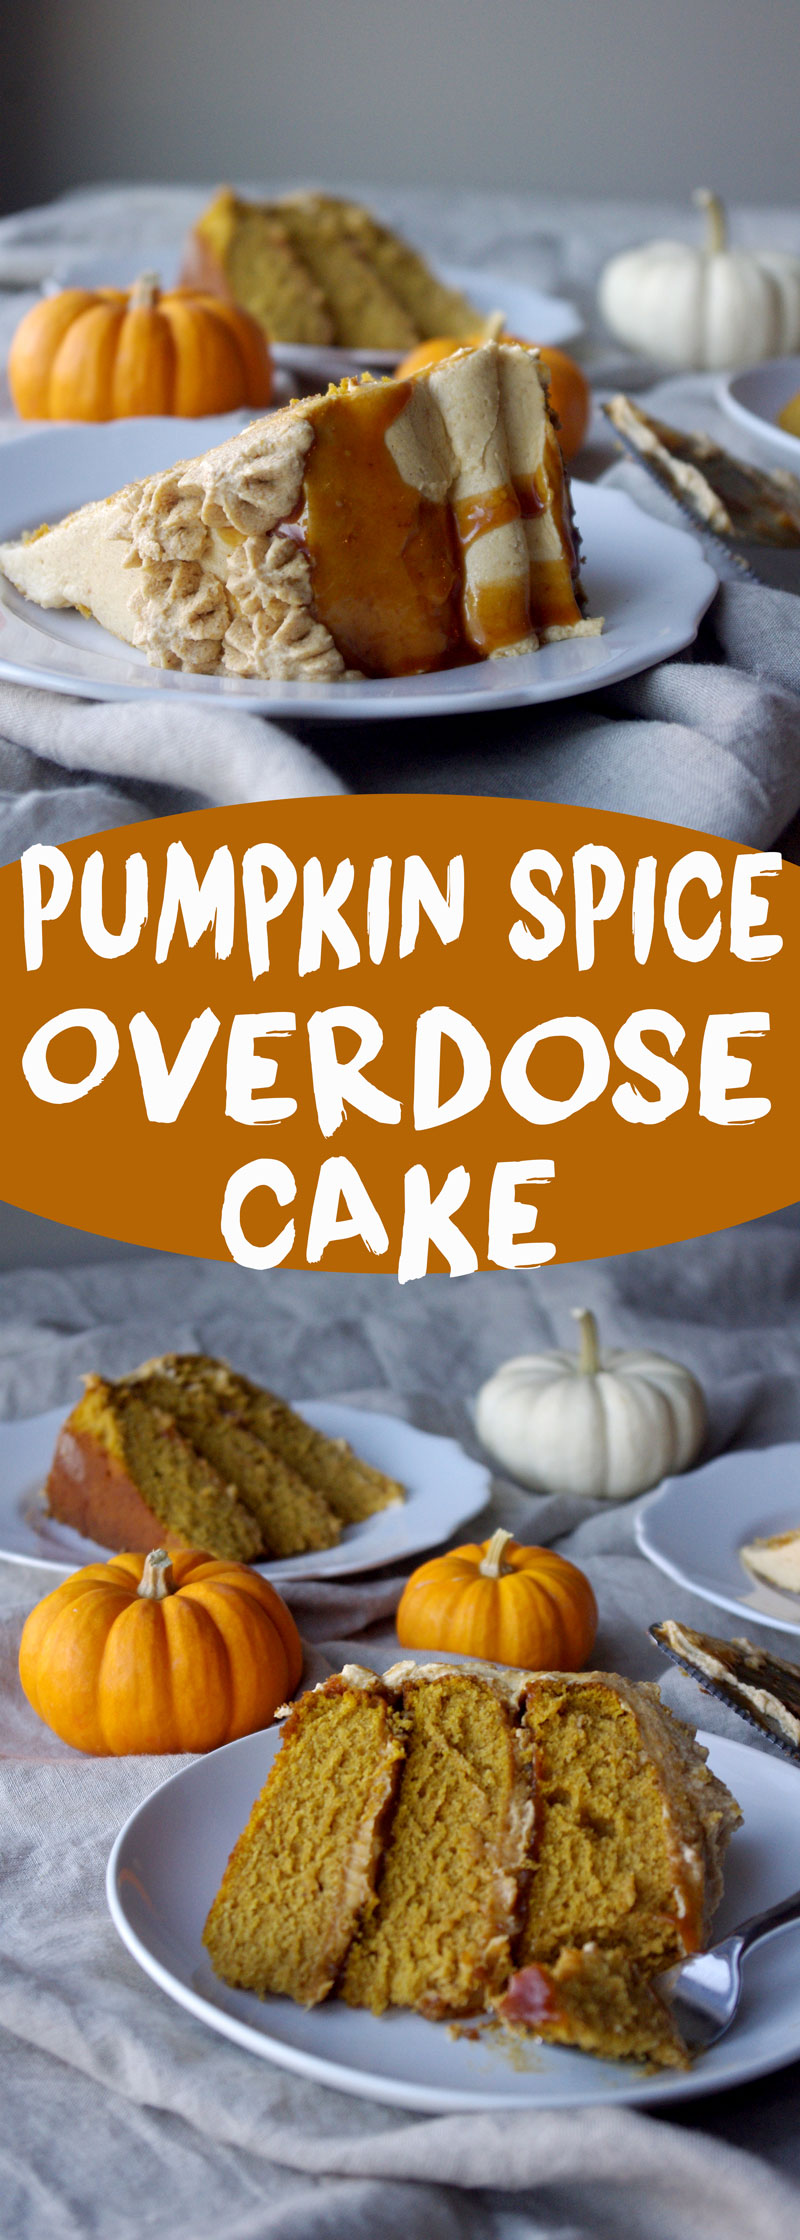 Pumpkin Spice Overdose Cake - 3 layers of soft pumpkin cake filled with pumpkin ganache and pumpkin salted caramel with pumpkin frosting and decorated with pumpkin whipped cream, aka ALL THE PUMPKIN! | www.thebatterthickens.com 